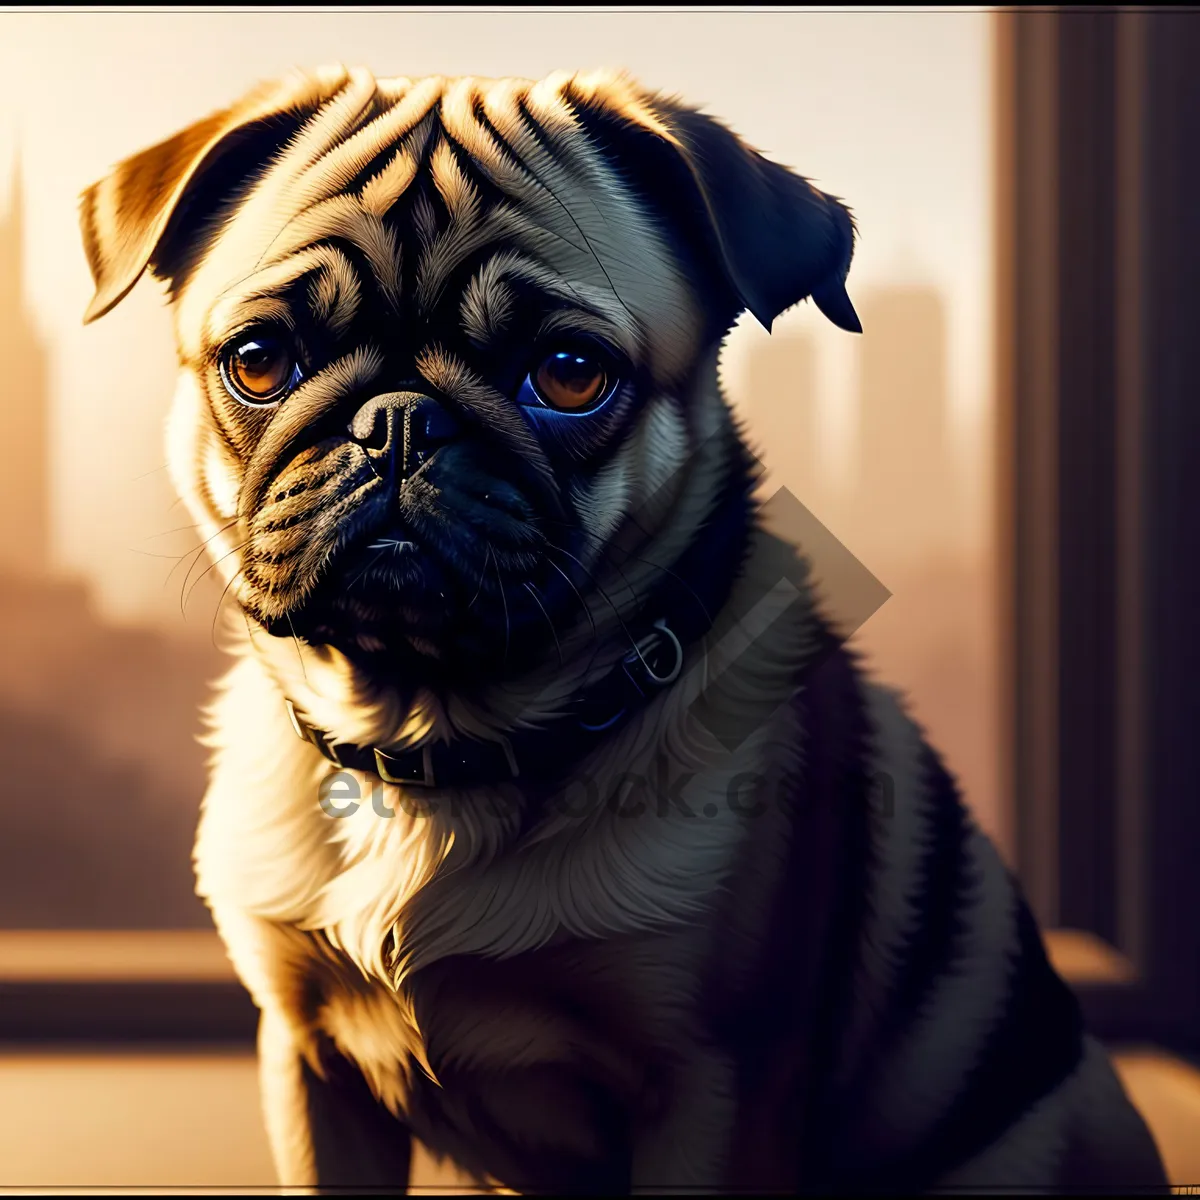 Picture of Cute Pug Doggy with Wrinkles - Adorable Portrait